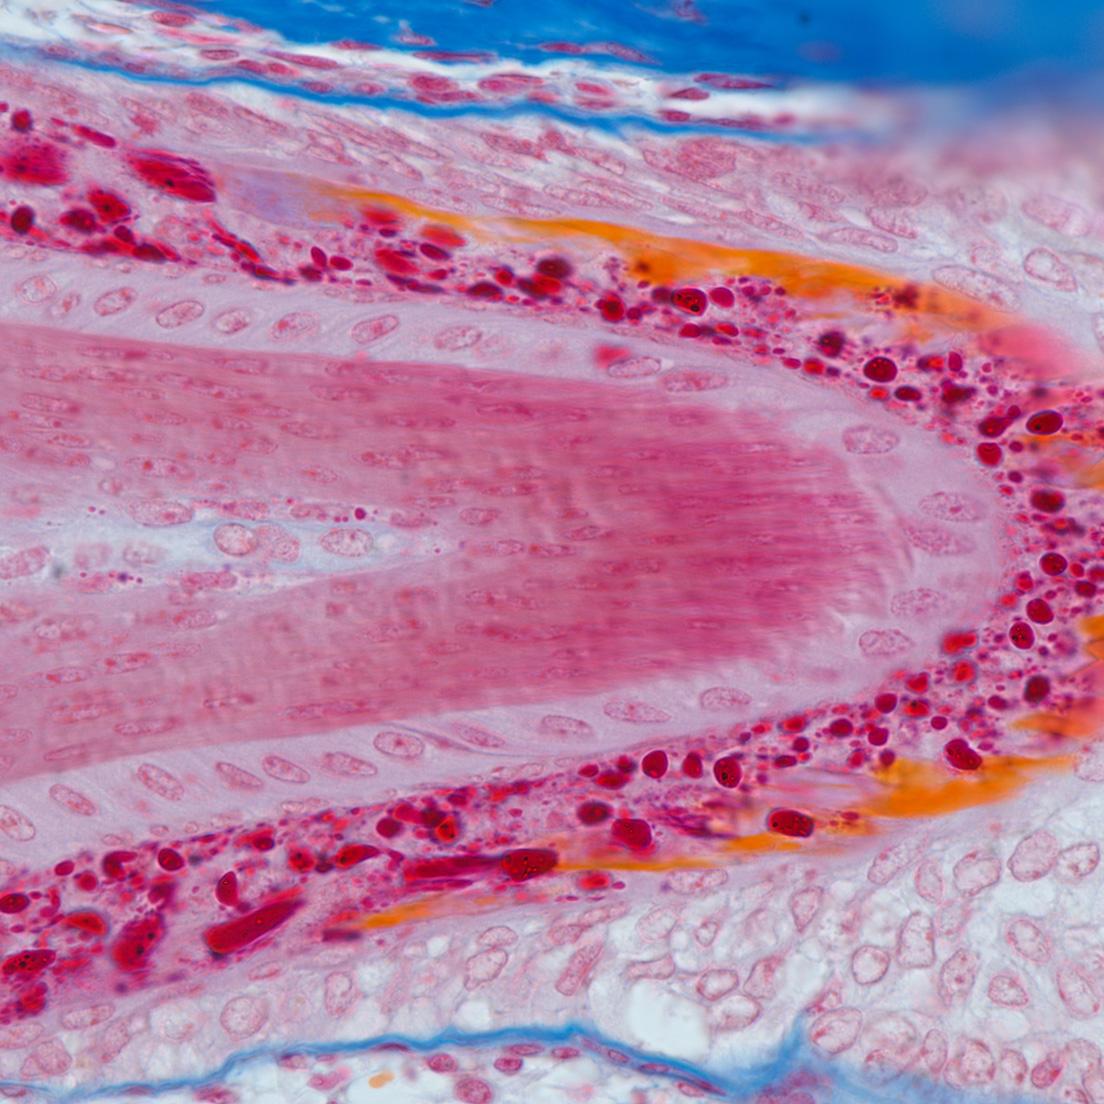 Mouth region of a mouse embryo section, objective: Plan-APOCHROMAT 63xl1.4 oil